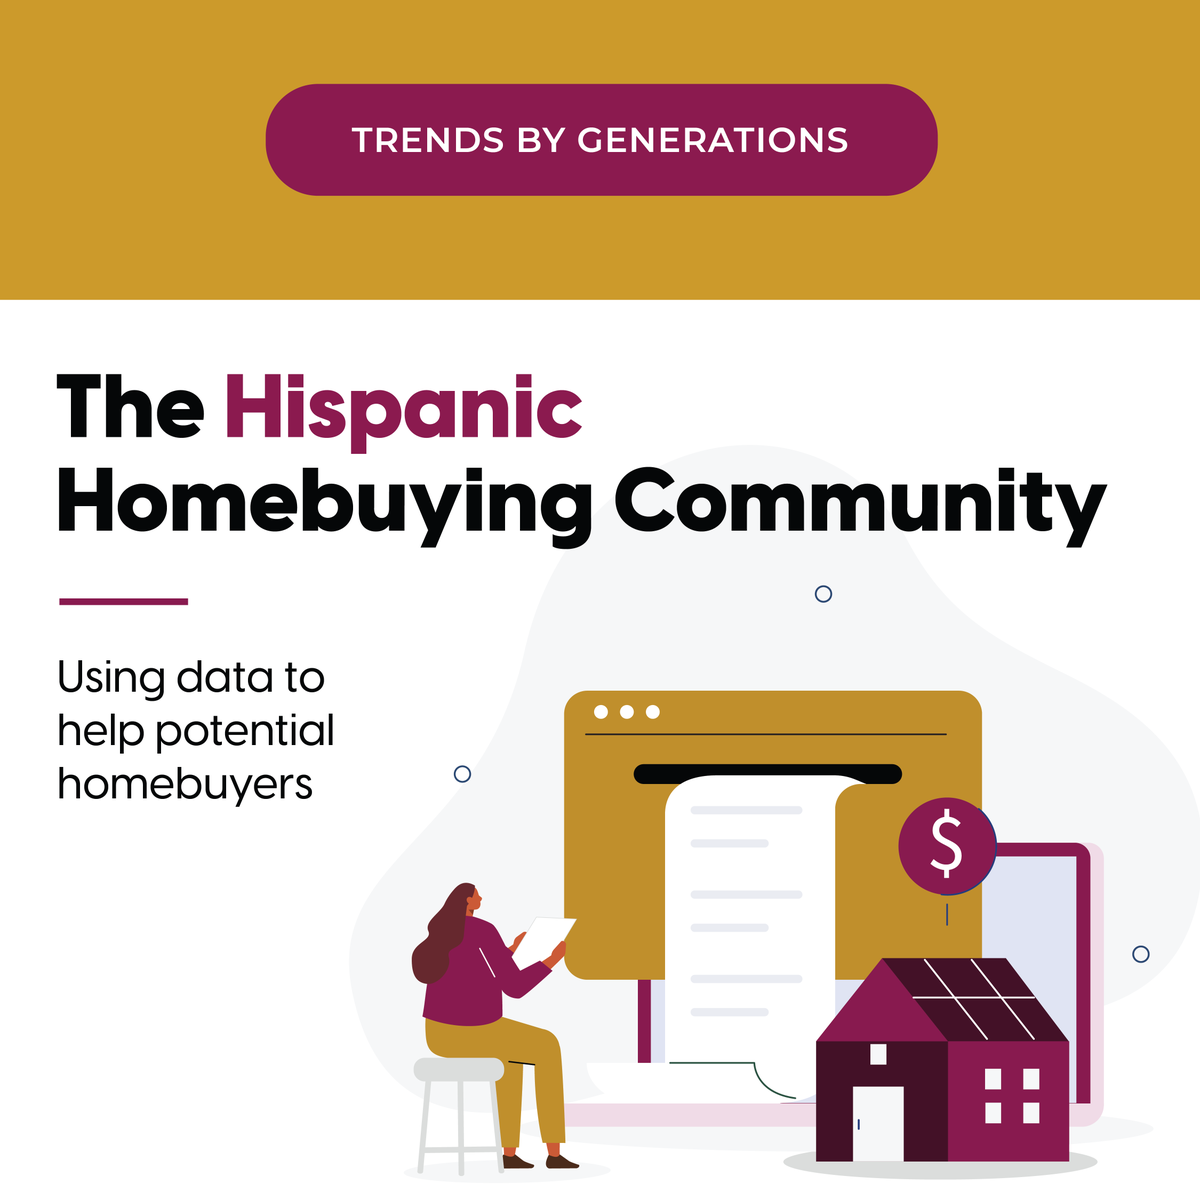 We explored all the data found in the annual State of Hispanic Homeownership Report released by our friends at NAHREP. 

We discovered Latinos are rapidly forming new households! Learn more here! spr.ly/6019P2nzb #HispanicHeritage #HomebuyingTrends #HispanicCommunity